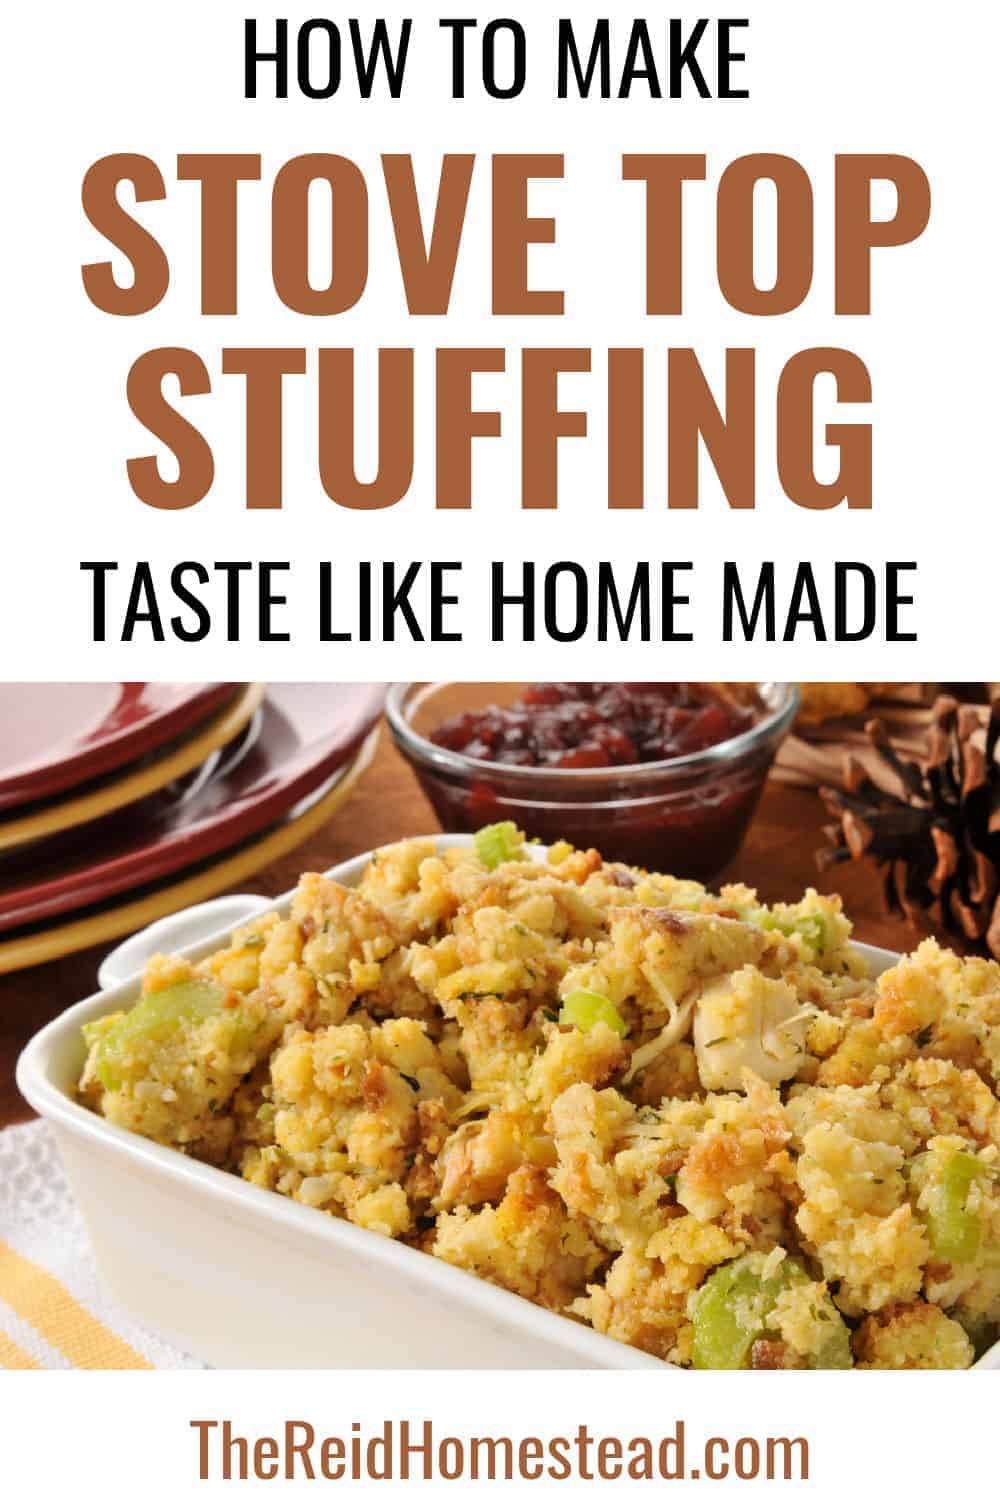 dish of stuffing with text overlay How to Make Stove Top Stuffing Taste Like Home made